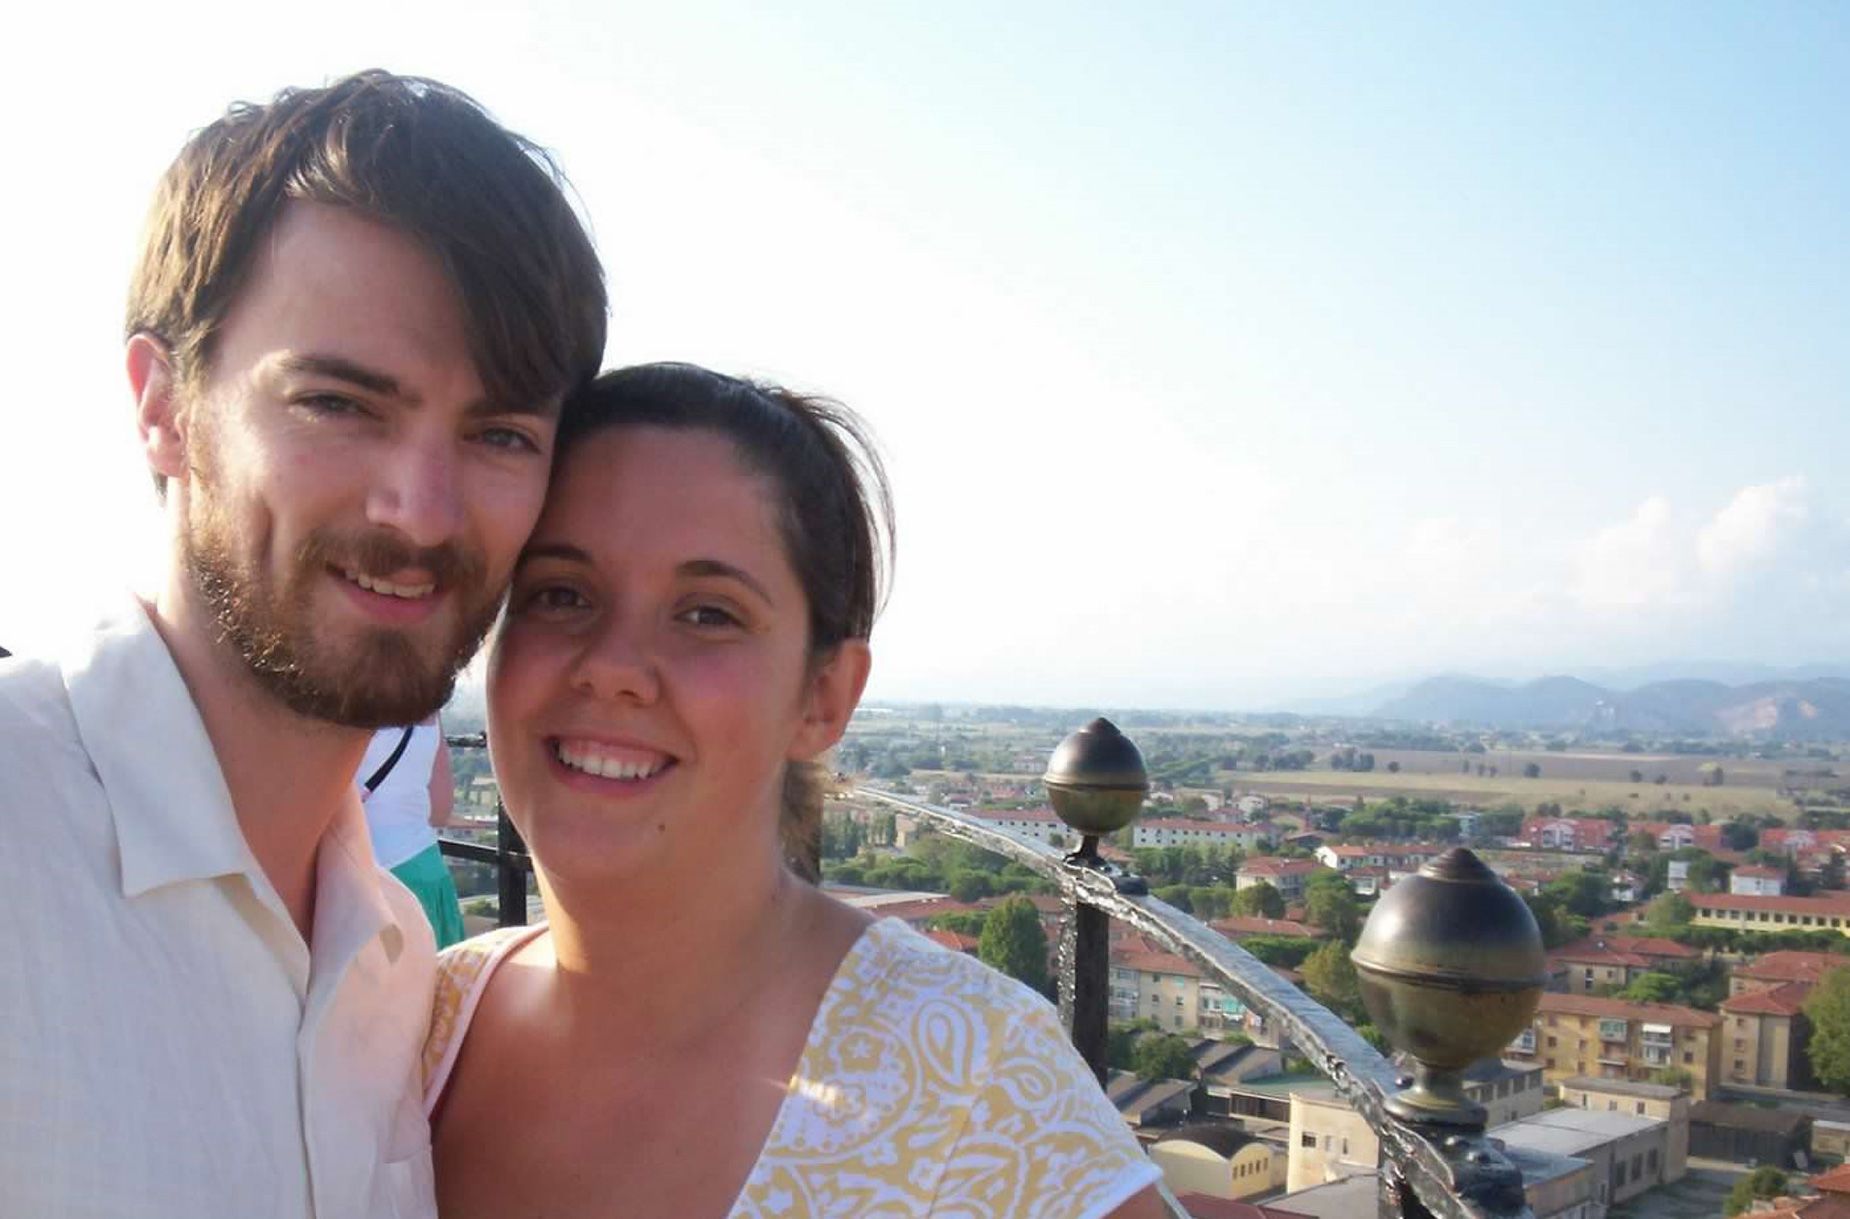 Here's the couple on top of the Leaning Tower of Pisa. Pisa is Gabriella's home city.